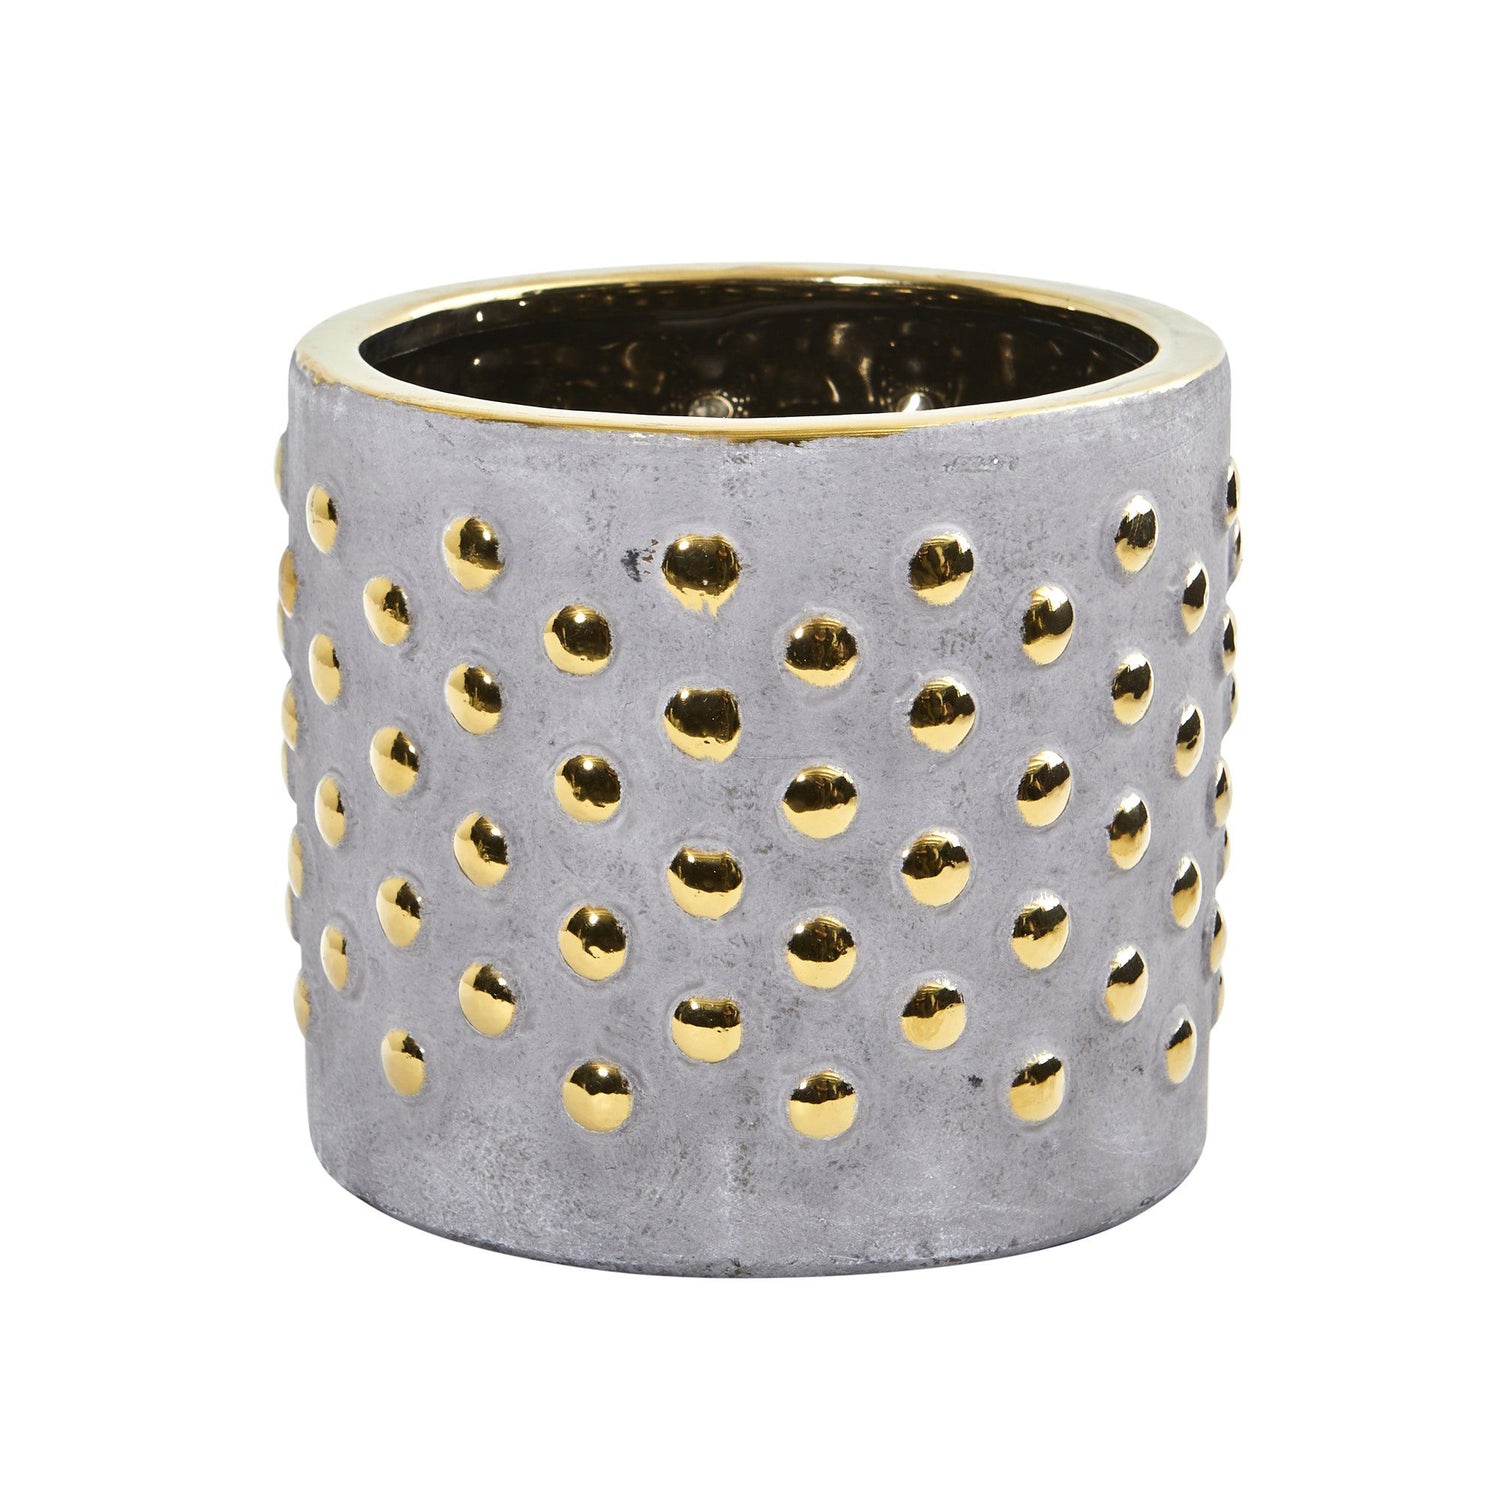 7” Regal Stone Hobnail Planter with Gold Accents